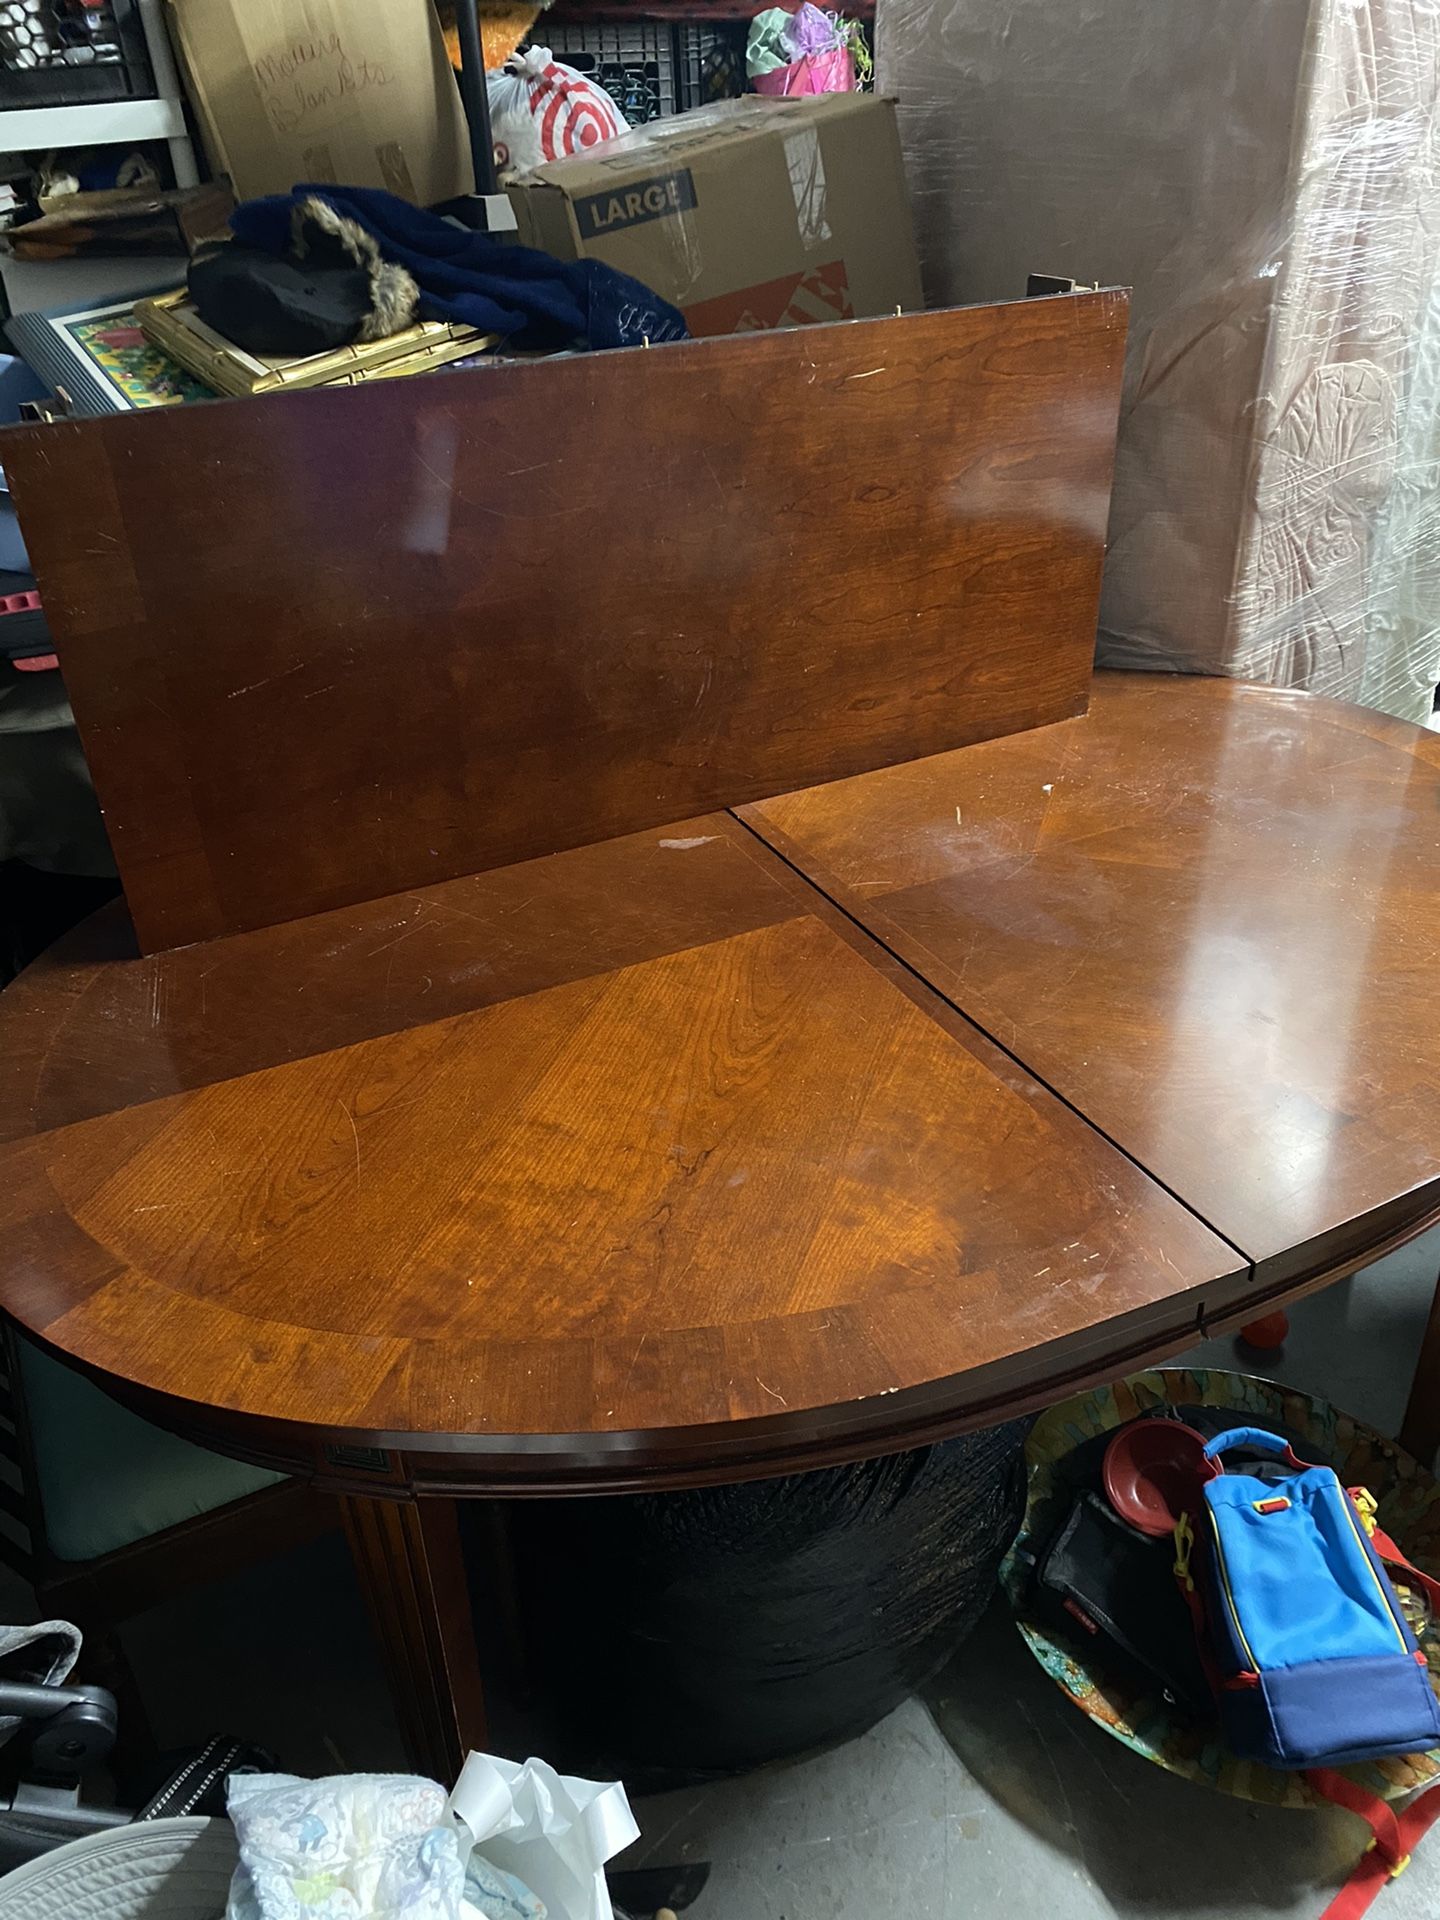 Oval Dining Room Table